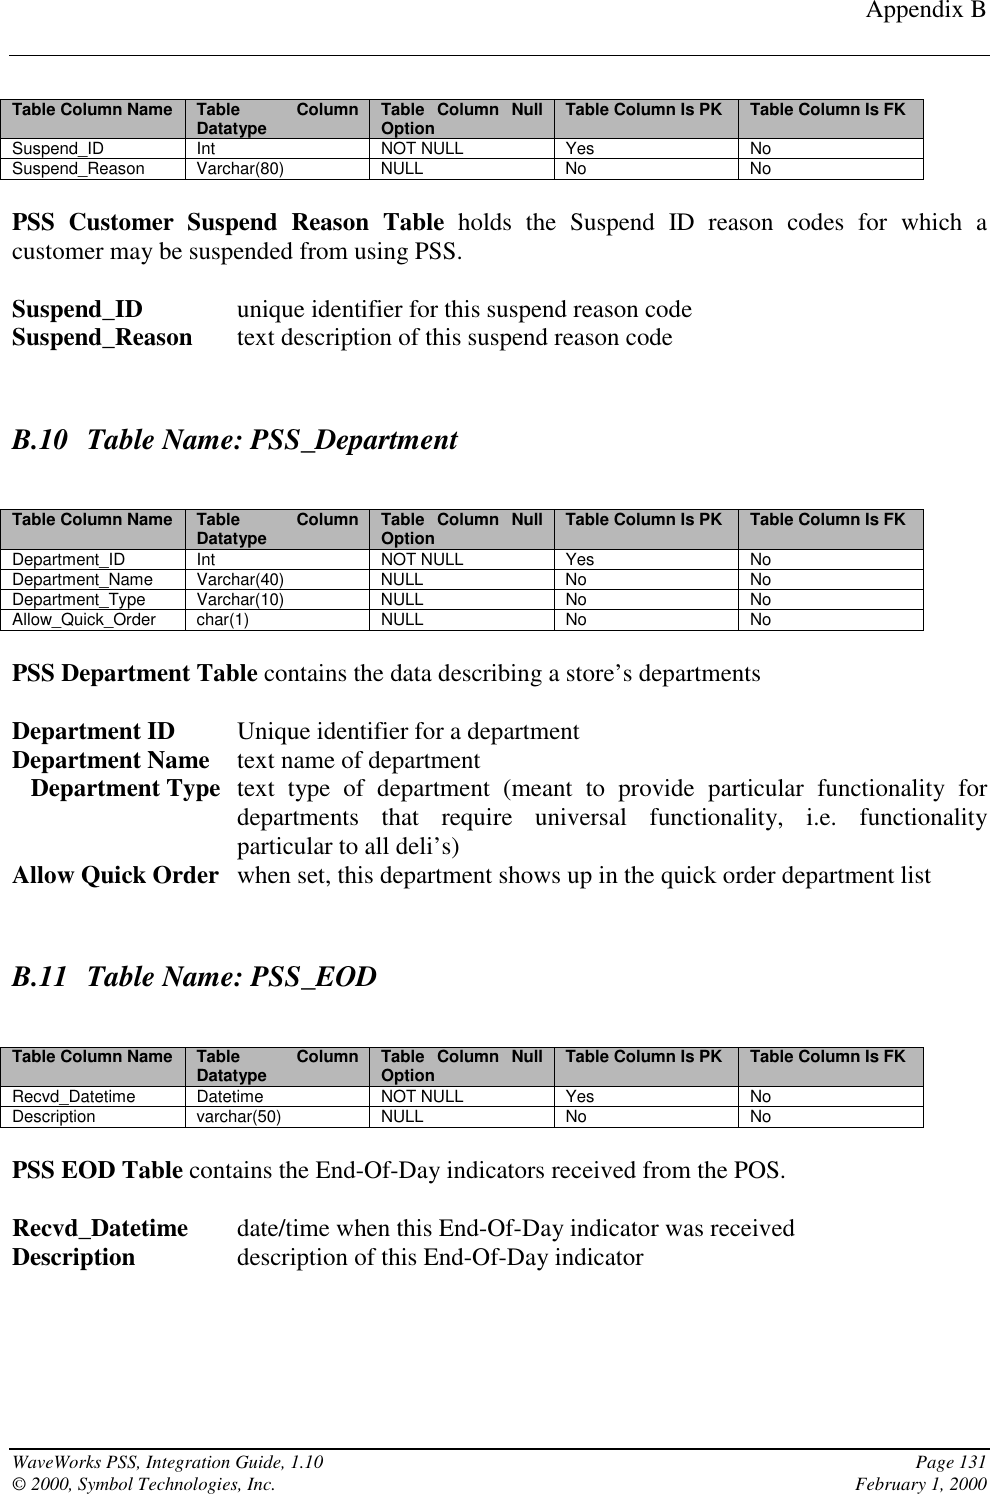 Appendix BWaveWorks PSS, Integration Guide, 1.10 Page 131© 2000, Symbol Technologies, Inc. February 1, 2000Table Column Name Table ColumnDatatype Table Column NullOption Table Column Is PK Table Column Is FKSuspend_ID Int NOT NULL Yes NoSuspend_Reason Varchar(80) NULL No NoPSS Customer Suspend Reason Table holds the Suspend ID reason codes for which acustomer may be suspended from using PSS.Suspend_ID  unique identifier for this suspend reason codeSuspend_Reason text description of this suspend reason codeB.10 Table Name: PSS_DepartmentTable Column Name Table ColumnDatatype Table Column NullOption Table Column Is PK Table Column Is FKDepartment_ID Int NOT NULL Yes NoDepartment_Name Varchar(40) NULL No NoDepartment_Type Varchar(10) NULL No NoAllow_Quick_Order char(1) NULL No NoPSS Department Table contains the data describing a store’s departmentsDepartment ID Unique identifier for a departmentDepartment Name text name of department               Department Type text type of department (meant to provide particular functionality fordepartments that require universal functionality, i.e. functionalityparticular to all deli’s)Allow Quick Order when set, this department shows up in the quick order department listB.11 Table Name: PSS_EODTable Column Name Table ColumnDatatype Table Column NullOption Table Column Is PK Table Column Is FKRecvd_Datetime Datetime NOT NULL Yes NoDescription varchar(50) NULL No NoPSS EOD Table contains the End-Of-Day indicators received from the POS.Recvd_Datetime date/time when this End-Of-Day indicator was receivedDescription description of this End-Of-Day indicator